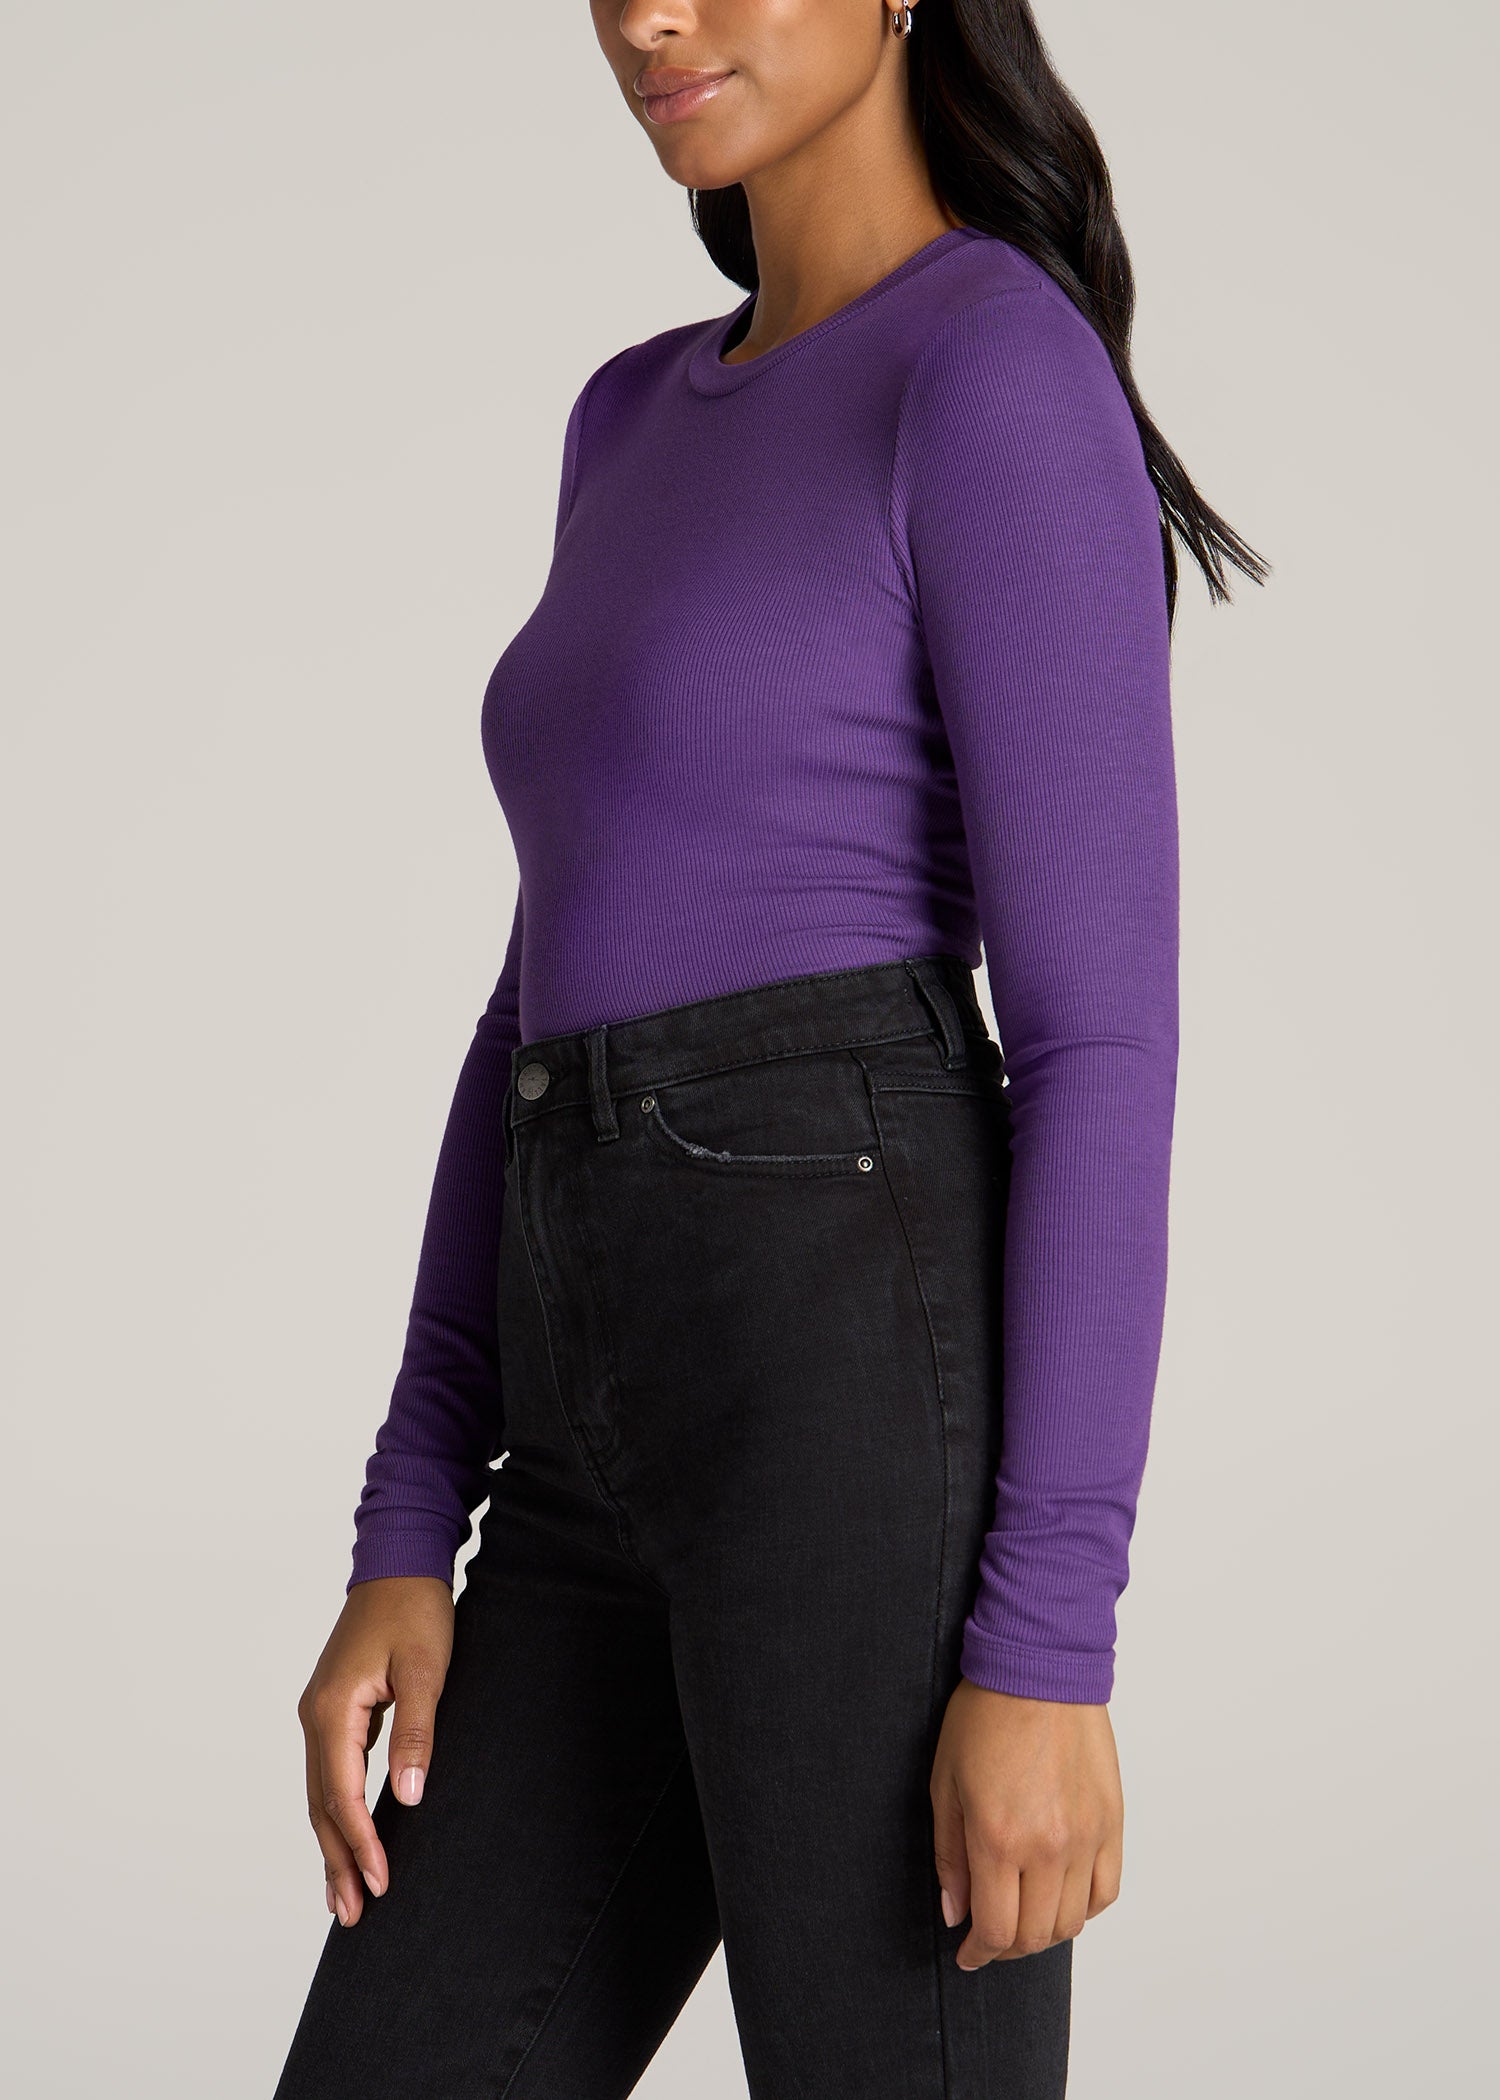 American-Tall-Women-Long-Sleeved-Ribbed-Crew-Neck-Tee-Aster-Purple-side